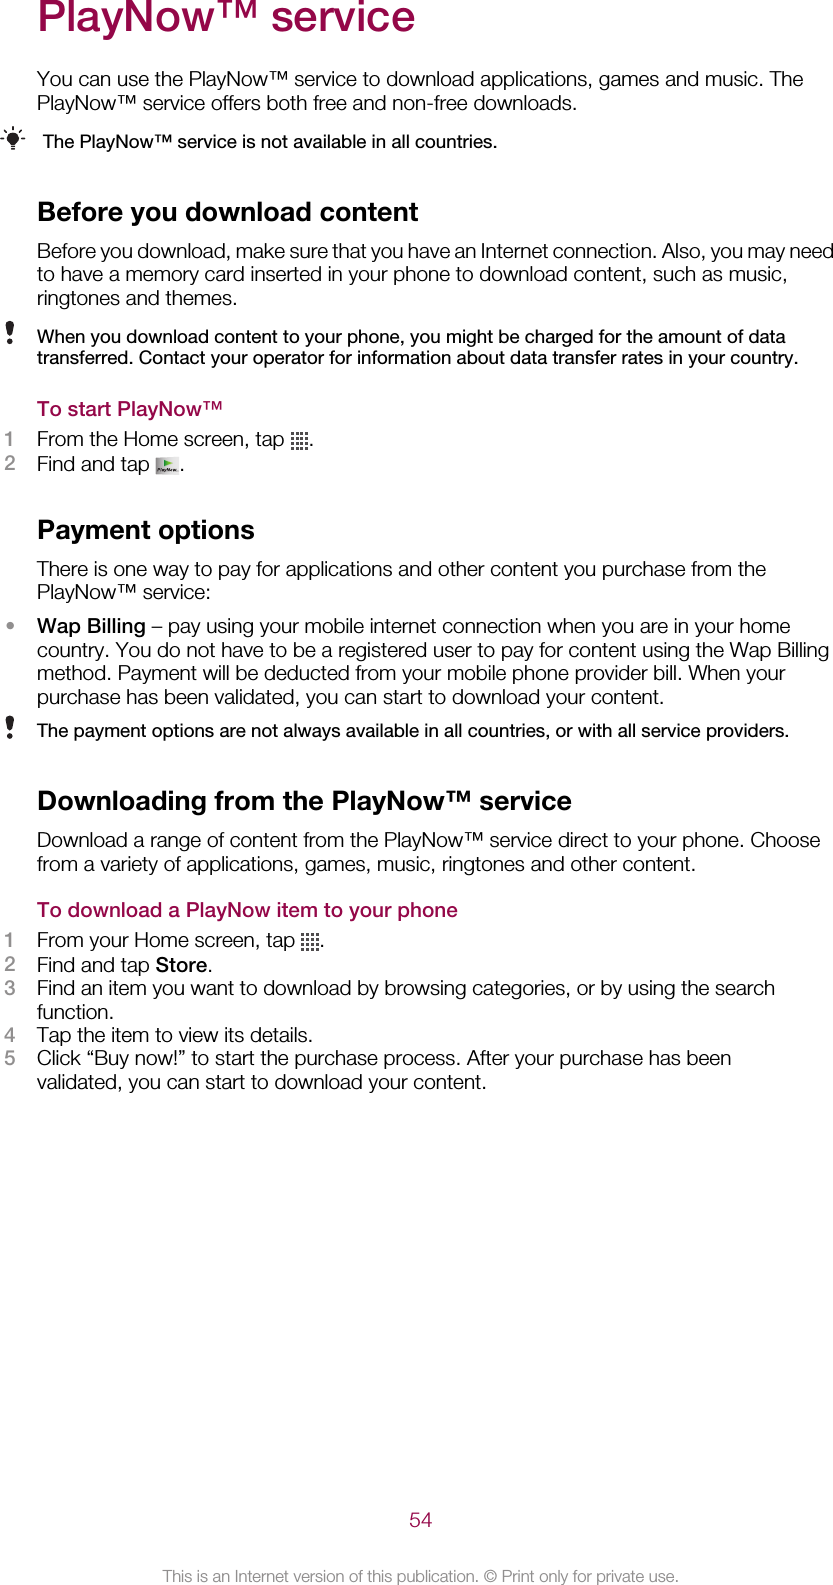 PlayNow™ serviceYou can use the PlayNow™ service to download applications, games and music. ThePlayNow™ service offers both free and non-free downloads.The PlayNow™ service is not available in all countries.Before you download contentBefore you download, make sure that you have an Internet connection. Also, you may needto have a memory card inserted in your phone to download content, such as music,ringtones and themes.When you download content to your phone, you might be charged for the amount of datatransferred. Contact your operator for information about data transfer rates in your country.To start PlayNow™1From the Home screen, tap  .2Find and tap  .Payment optionsThere is one way to pay for applications and other content you purchase from thePlayNow™ service:•Wap Billing – pay using your mobile internet connection when you are in your homecountry. You do not have to be a registered user to pay for content using the Wap Billingmethod. Payment will be deducted from your mobile phone provider bill. When yourpurchase has been validated, you can start to download your content.The payment options are not always available in all countries, or with all service providers.Downloading from the PlayNow™ serviceDownload a range of content from the PlayNow™ service direct to your phone. Choosefrom a variety of applications, games, music, ringtones and other content.To download a PlayNow item to your phone1From your Home screen, tap  .2Find and tap Store.3Find an item you want to download by browsing categories, or by using the searchfunction.4Tap the item to view its details.5Click “Buy now!” to start the purchase process. After your purchase has beenvalidated, you can start to download your content.54This is an Internet version of this publication. © Print only for private use.